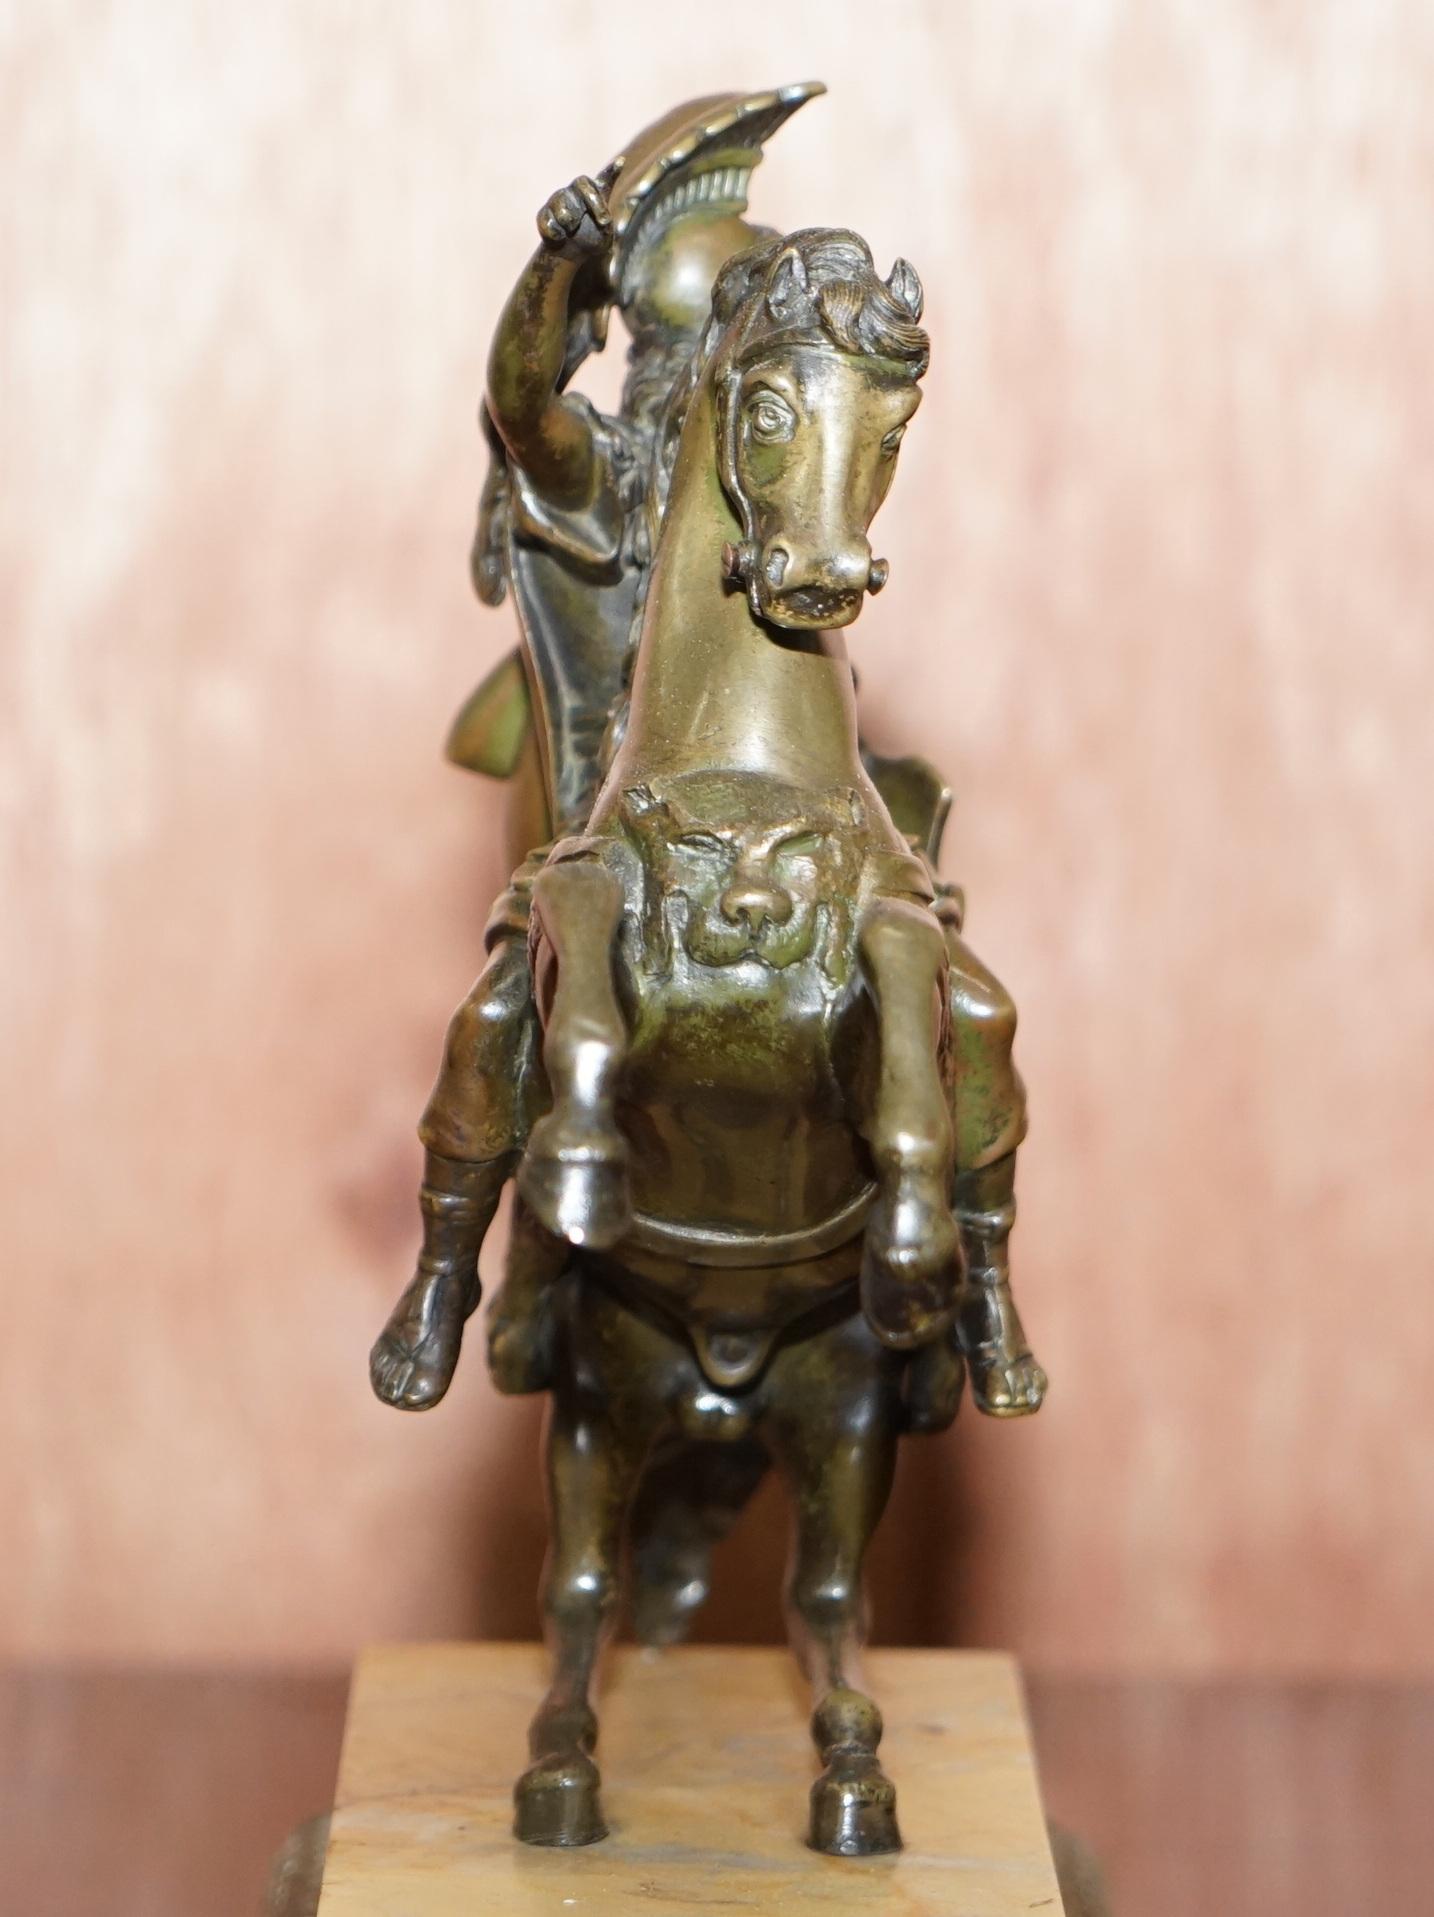 English Pair of 19th Century Equestrian Bronzes Russian Cossack & Roman Solider Horses For Sale